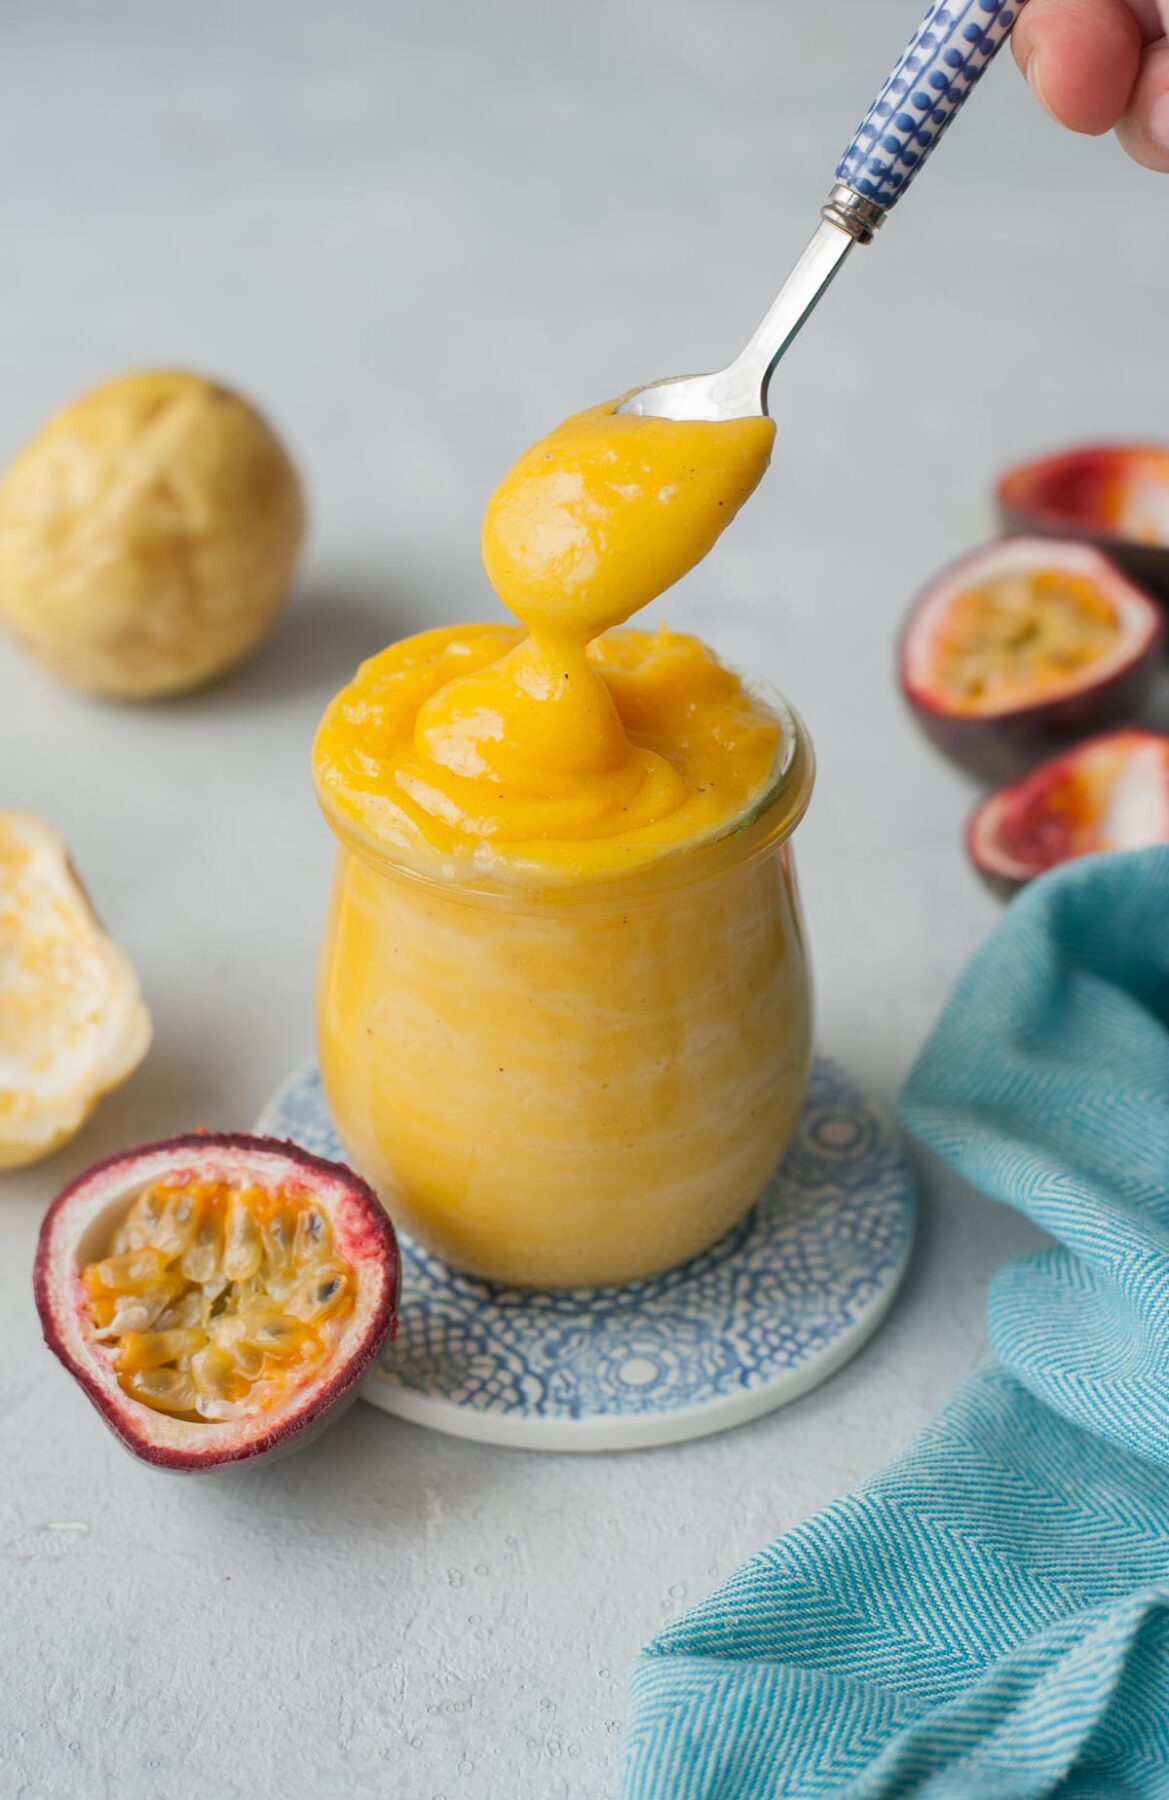 Passion fruit curd is being spooned into a jar. Passion fruits and a blue kitchen cloth in the background.